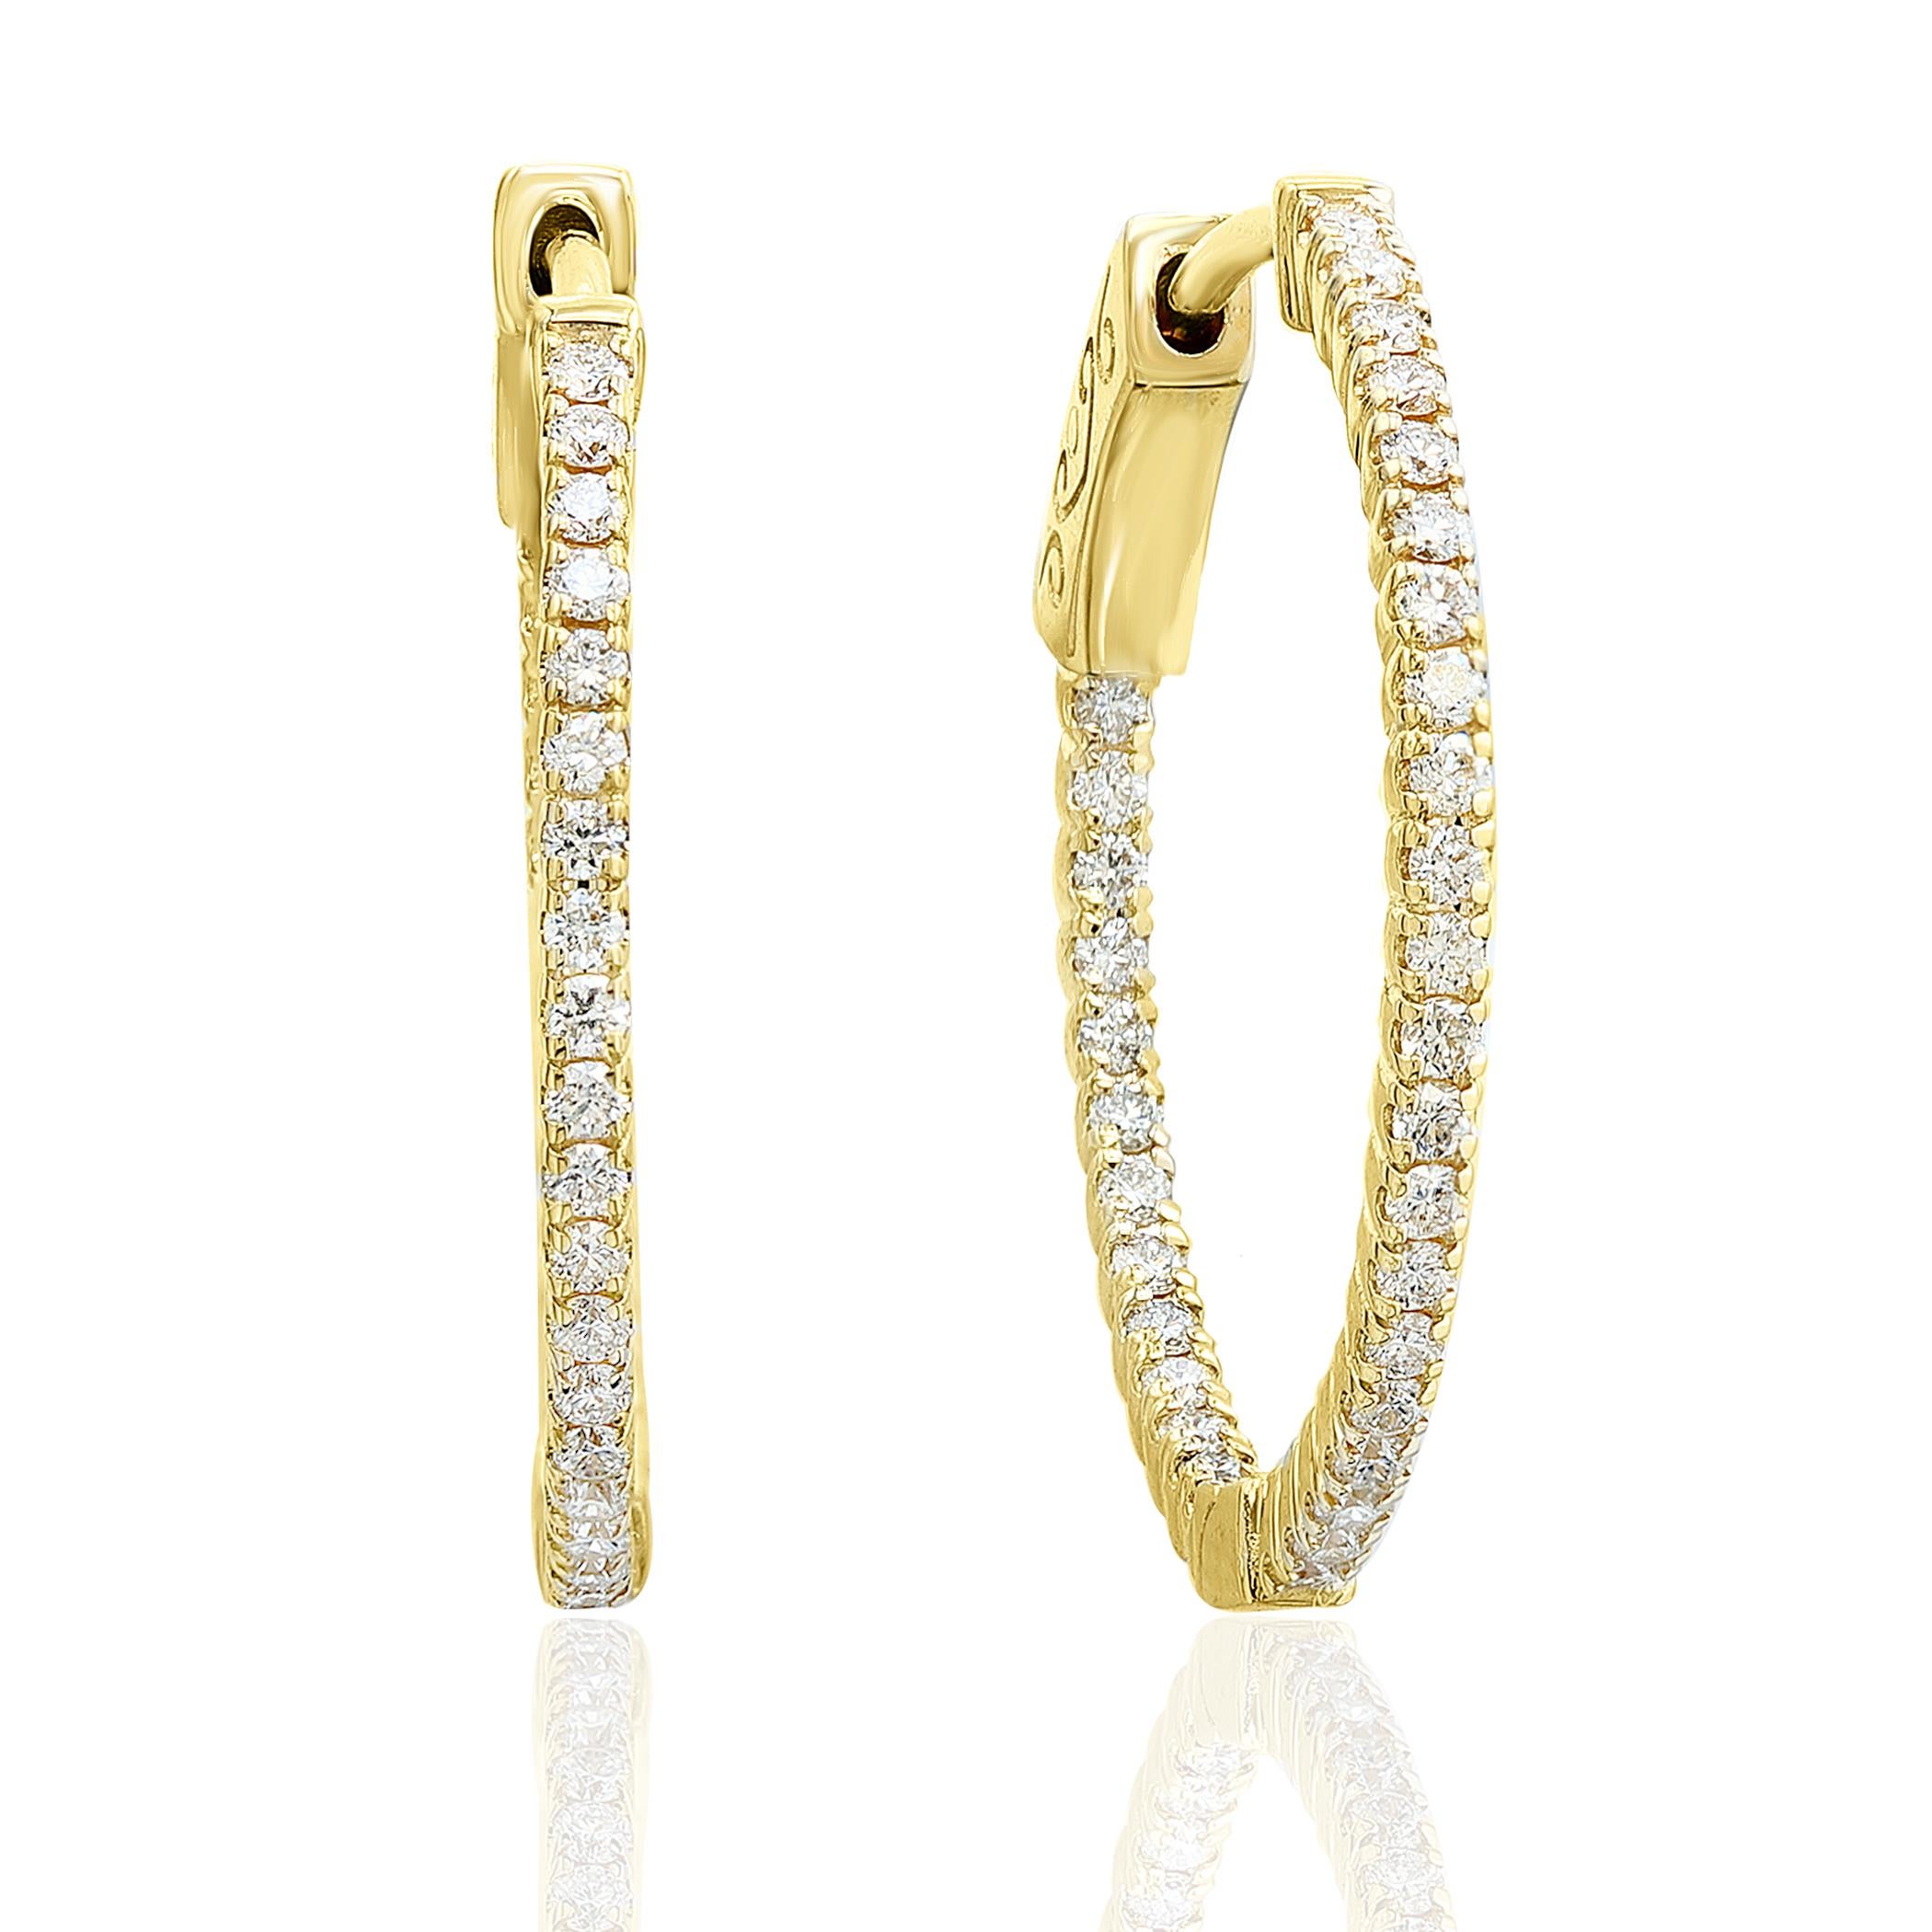 50-round brilliant diamonds

14k Yellow Gold

Total carat weight: 0.50 ct

GHSI1 quality (natural diamonds)

Prong setting

0.75mm width (hoop earring)
Safety push button clasp
In and out diamonds

Grey baroque pearls hanging by a loop (